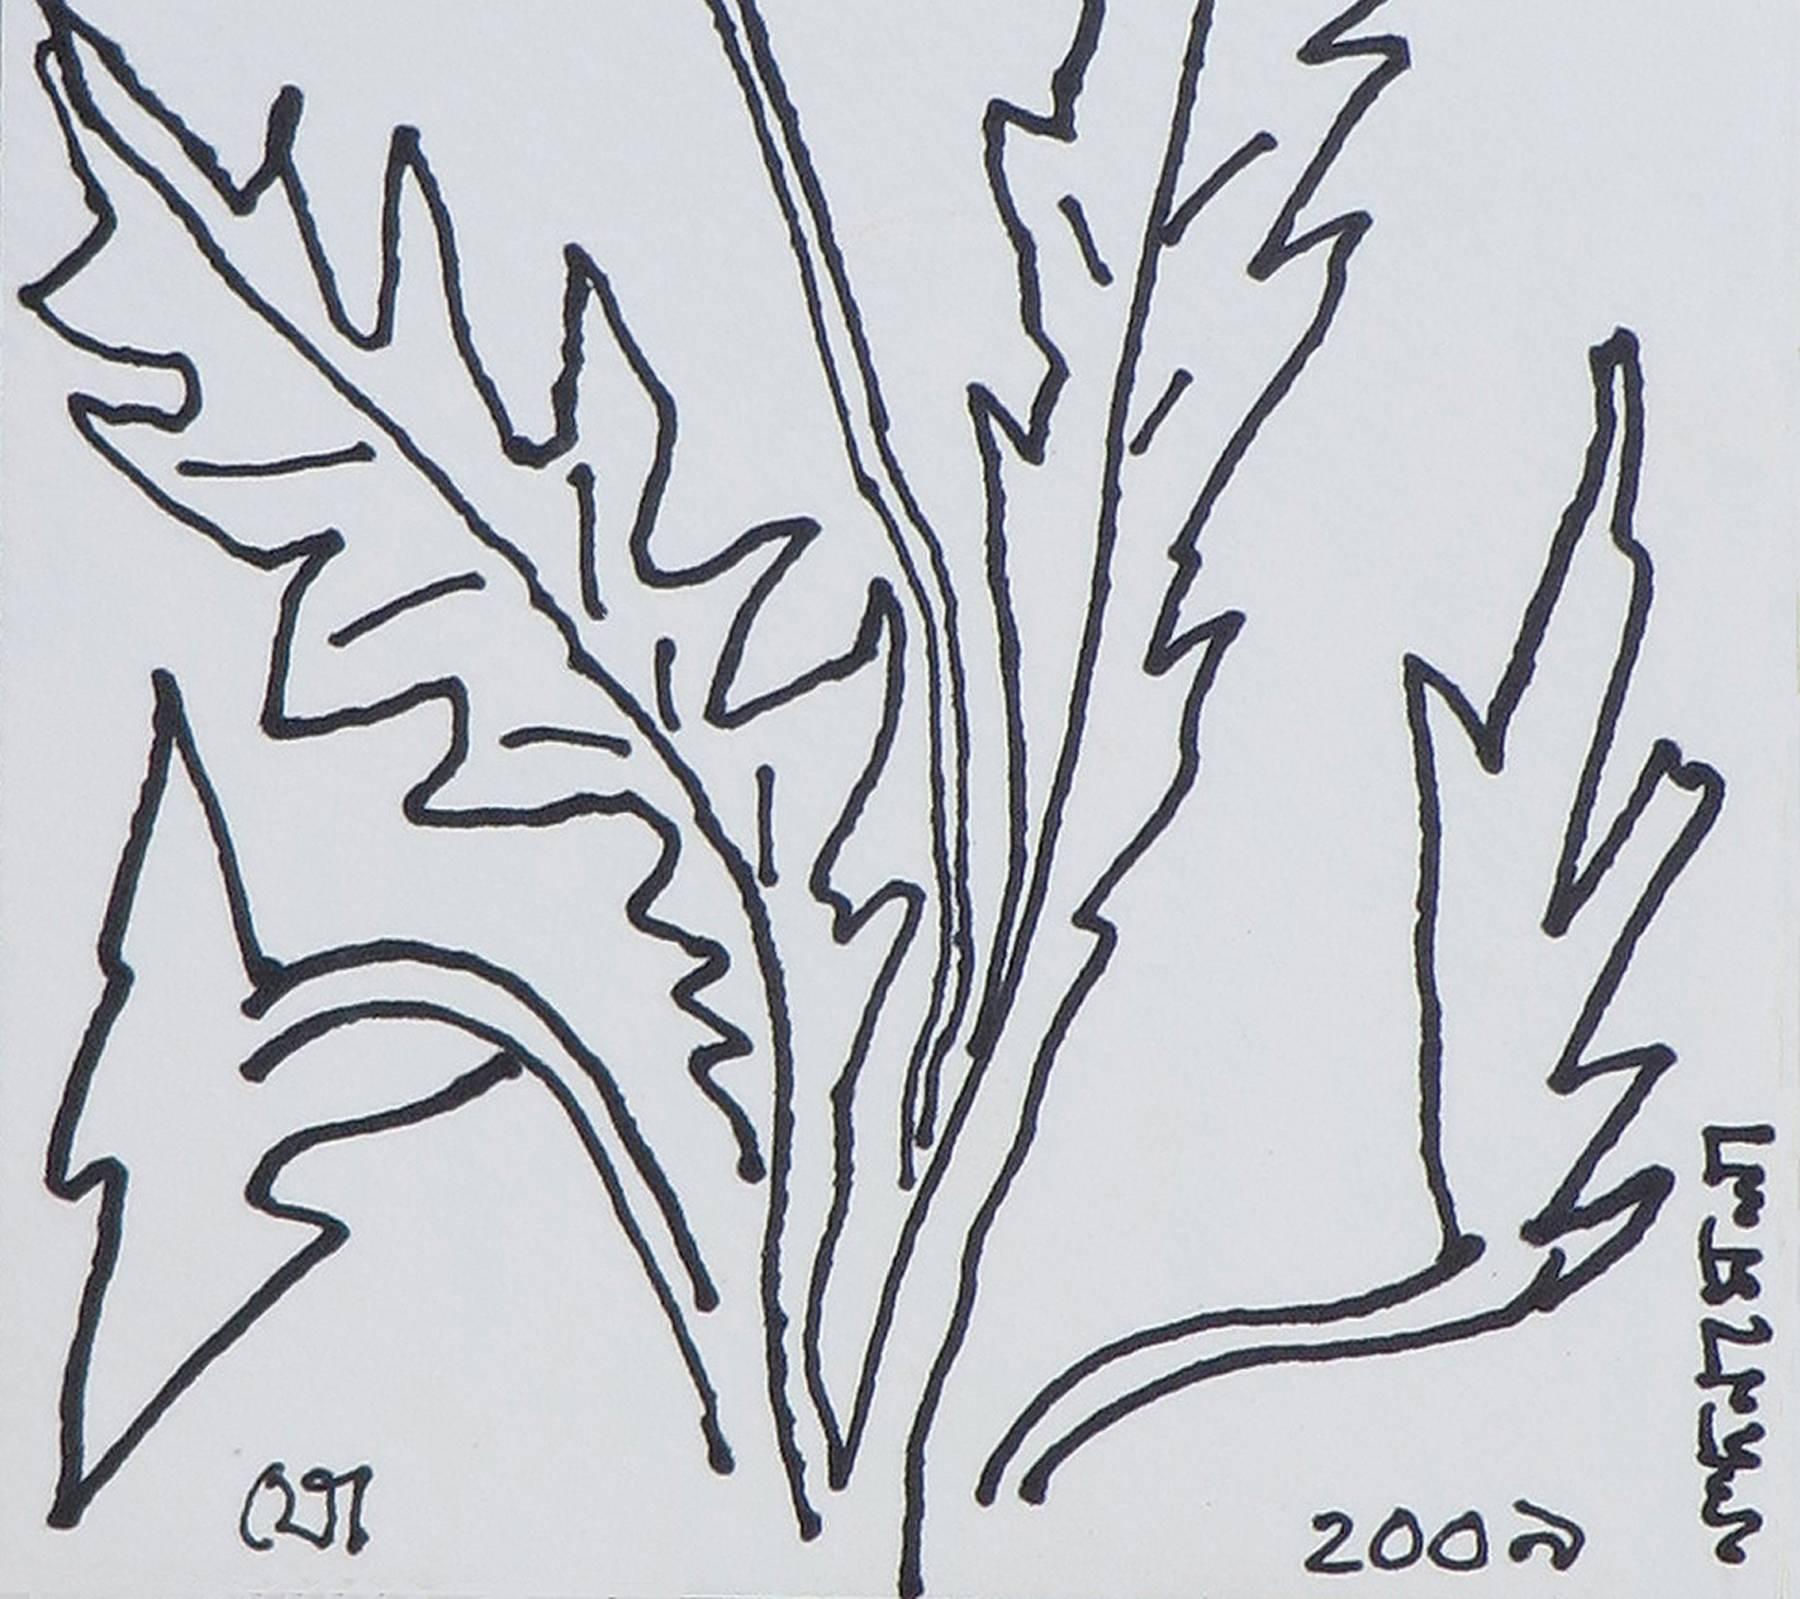 Foliage drawing , ink on paper by Indian Master Artist Jogen Chowdhury 1